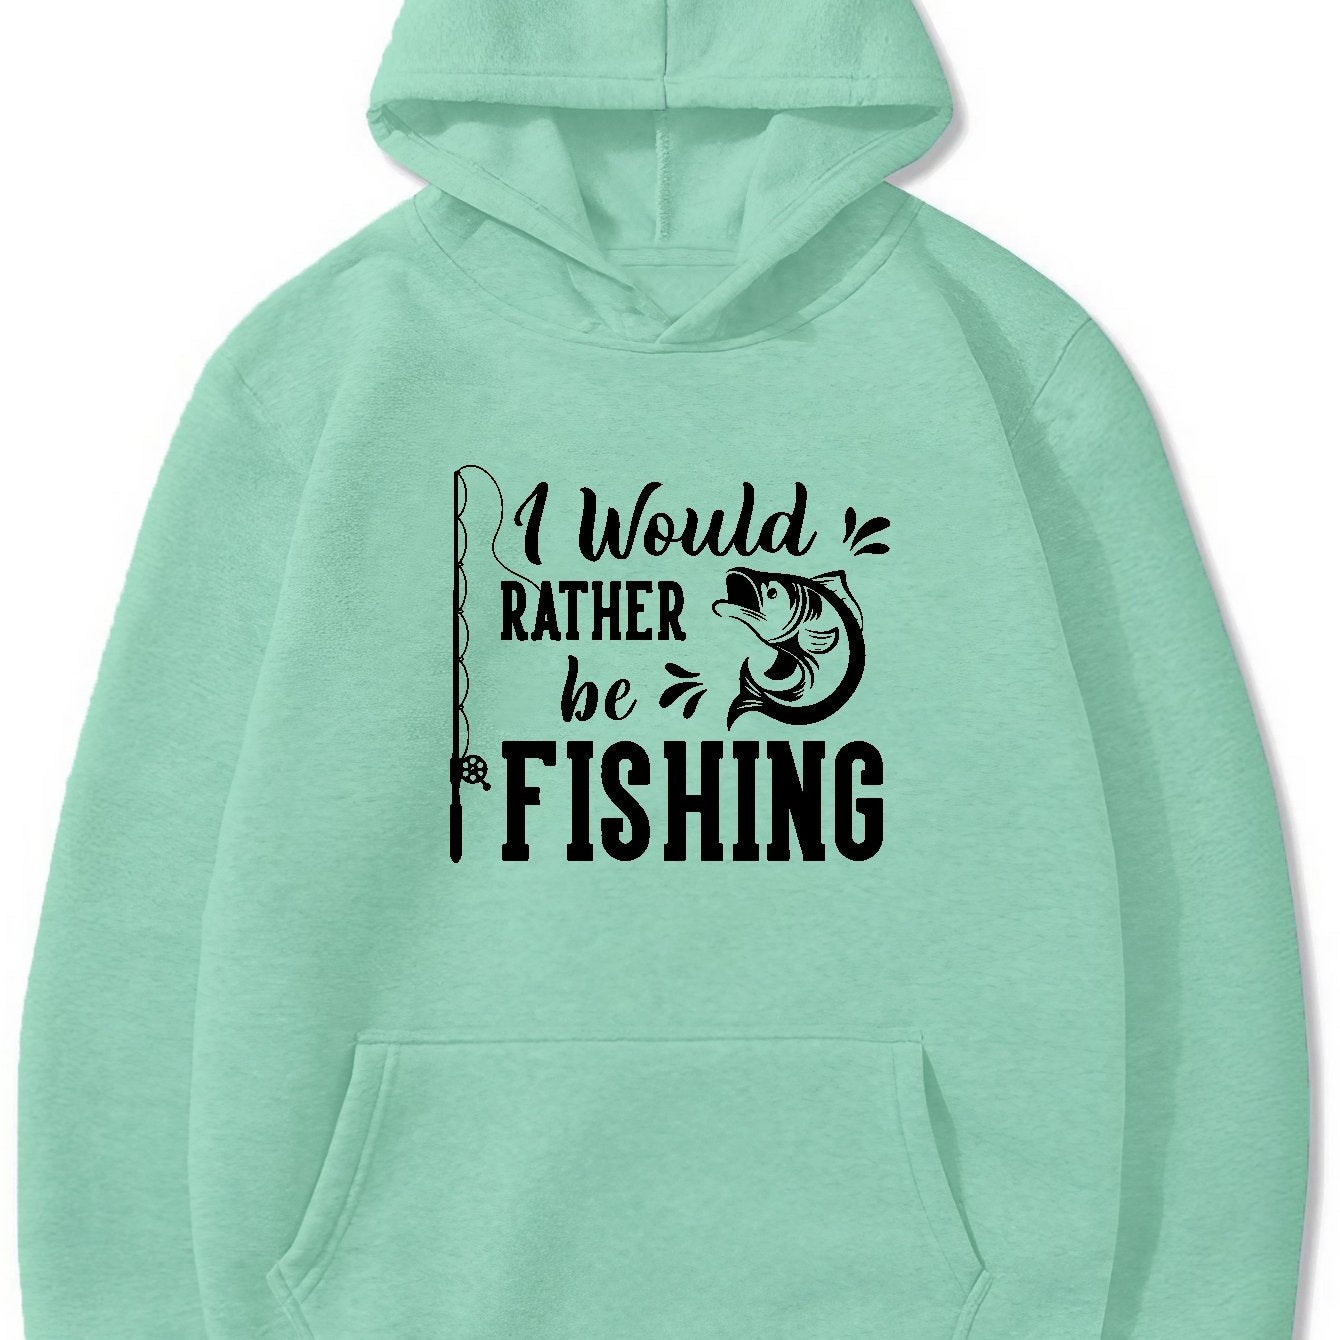 Fish Pattern And Letter Print Hoodie, Cool Hoodies For Men, Men's Casual Graphic Design Pullover Hooded Sweatshirt With Kangaroo Pocket Streetwear For Winter Fall, As Gifts